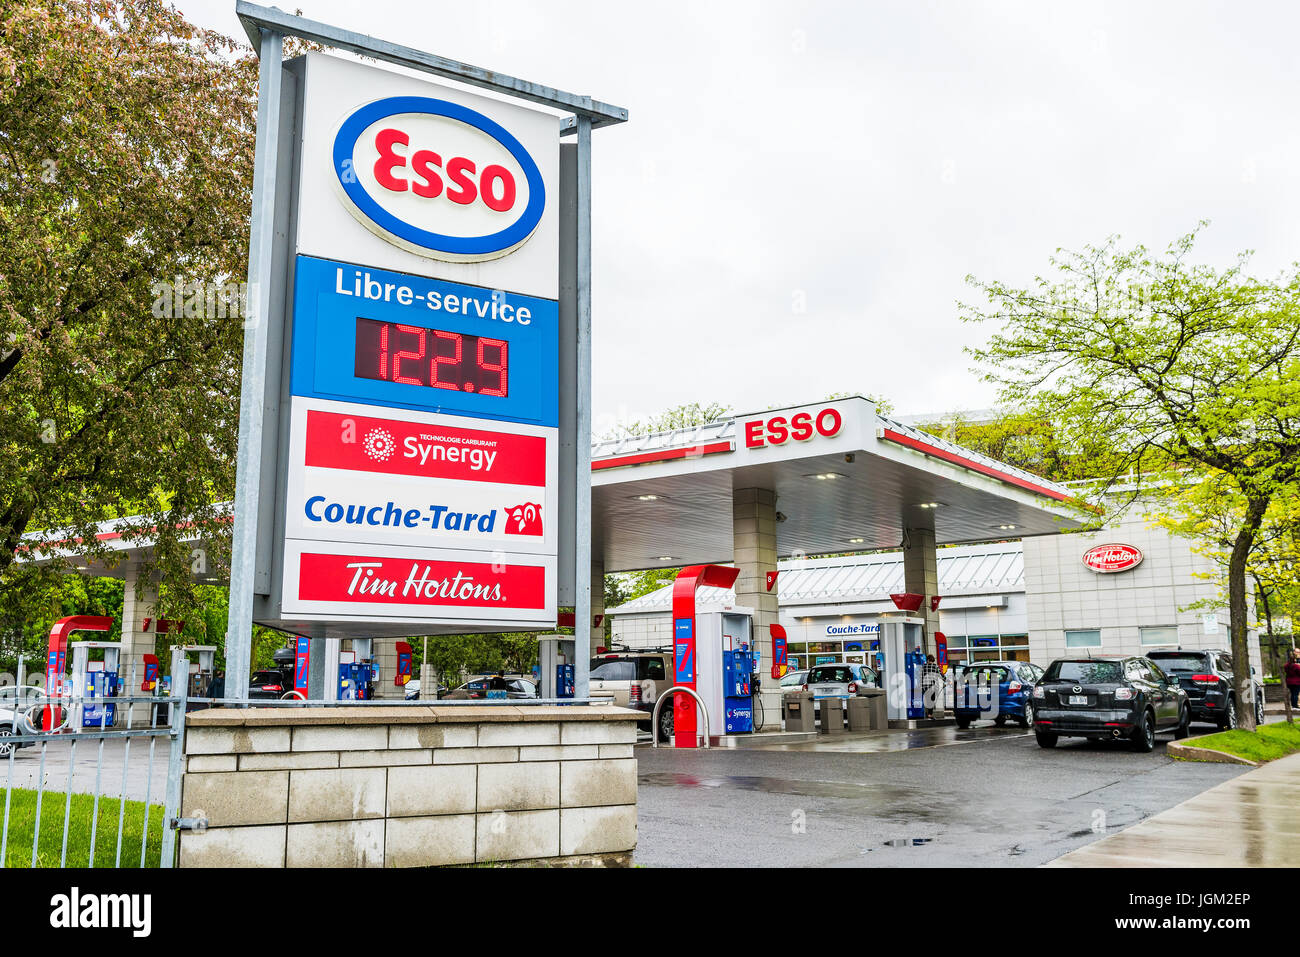 Montreal, Canada - May 26, 2017: Esso gas station in downtown for car fuel with prices and people Stock Photo